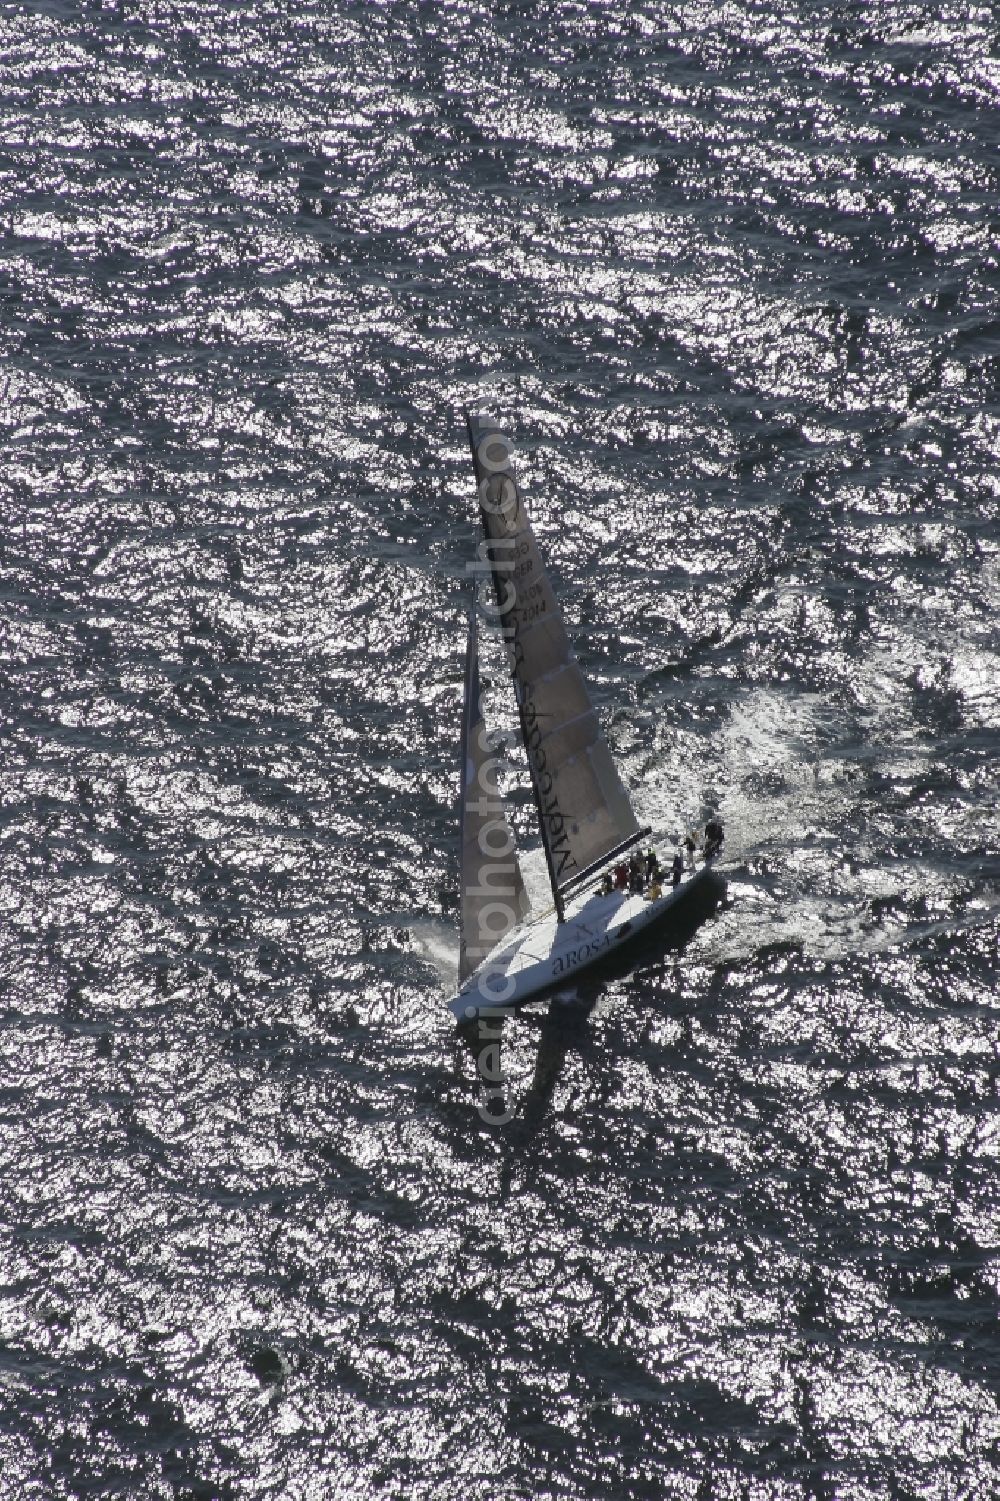 Aerial photograph Kiel - Offshore sailing racing yacht on the Kiel Fjord in Schleswig-Holstein